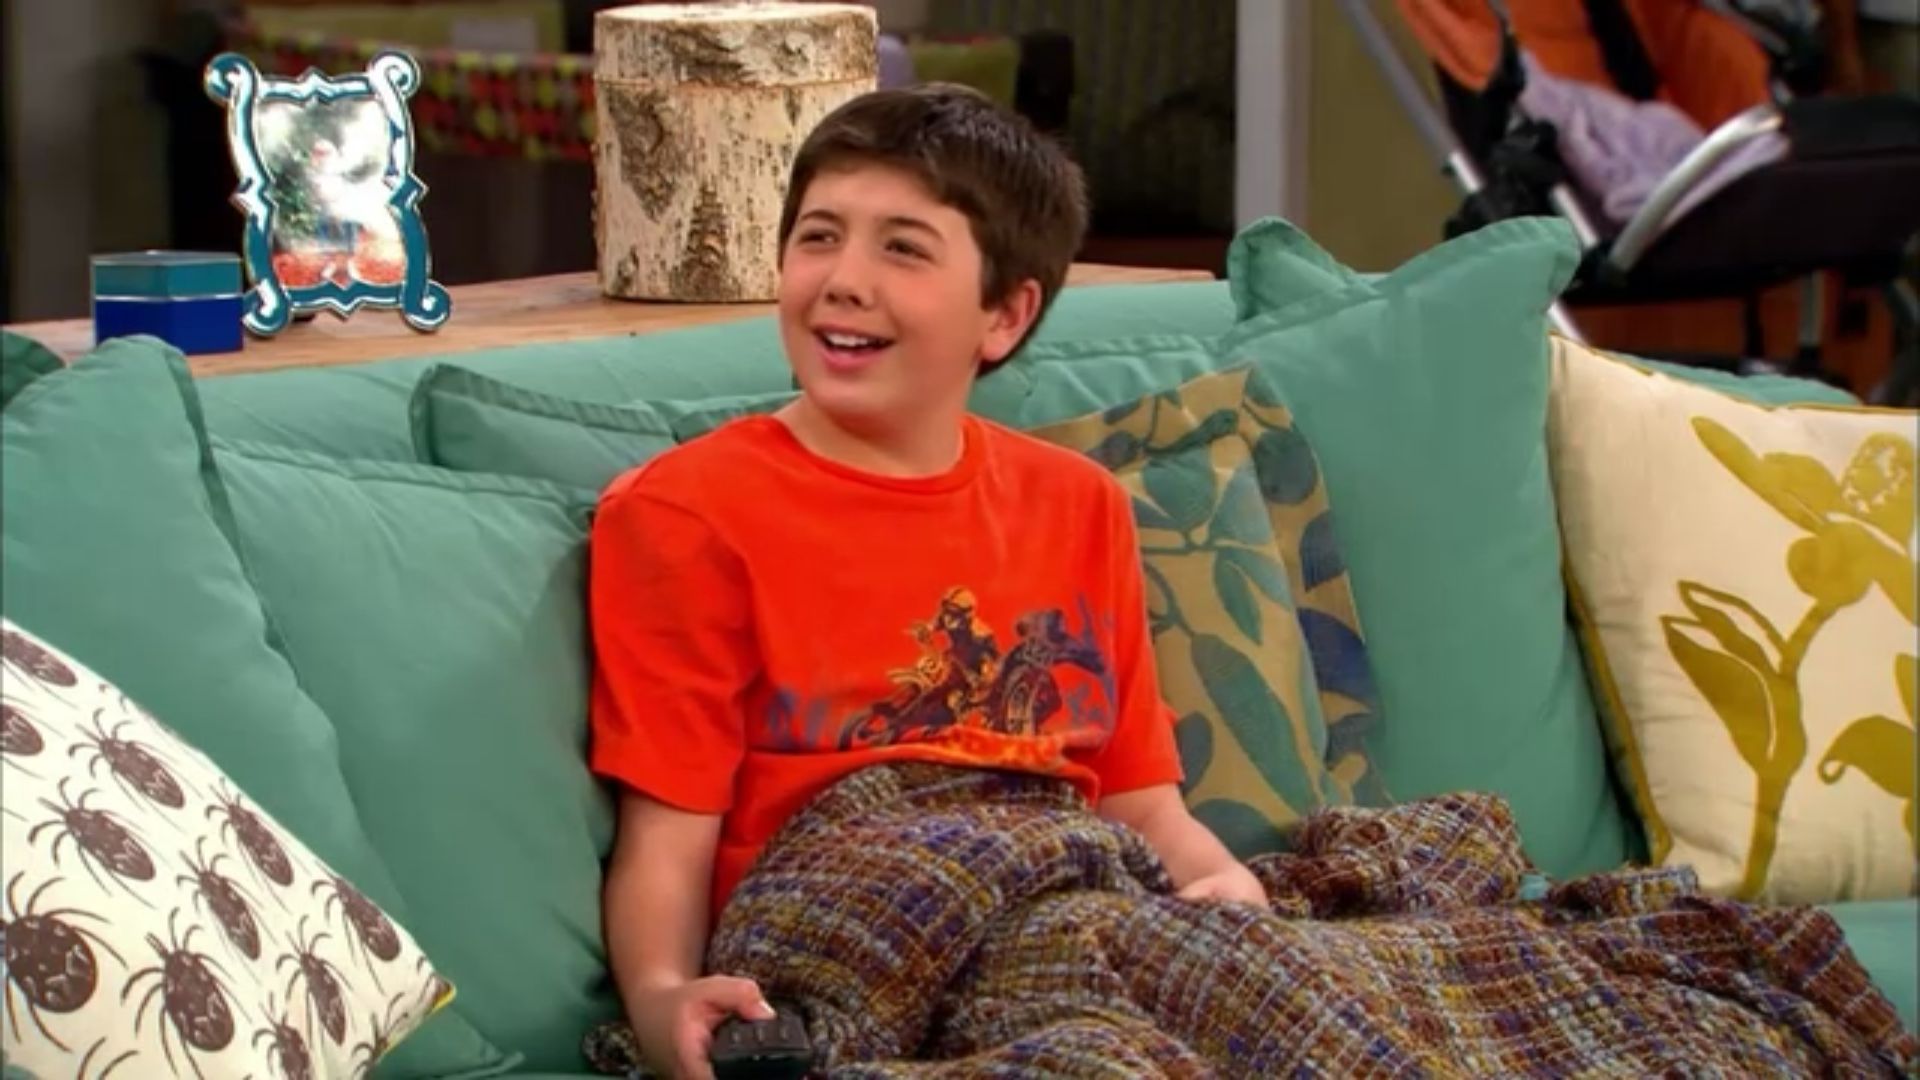 Picture of Bradley Steven Perry in Good Luck Charlie Season 1